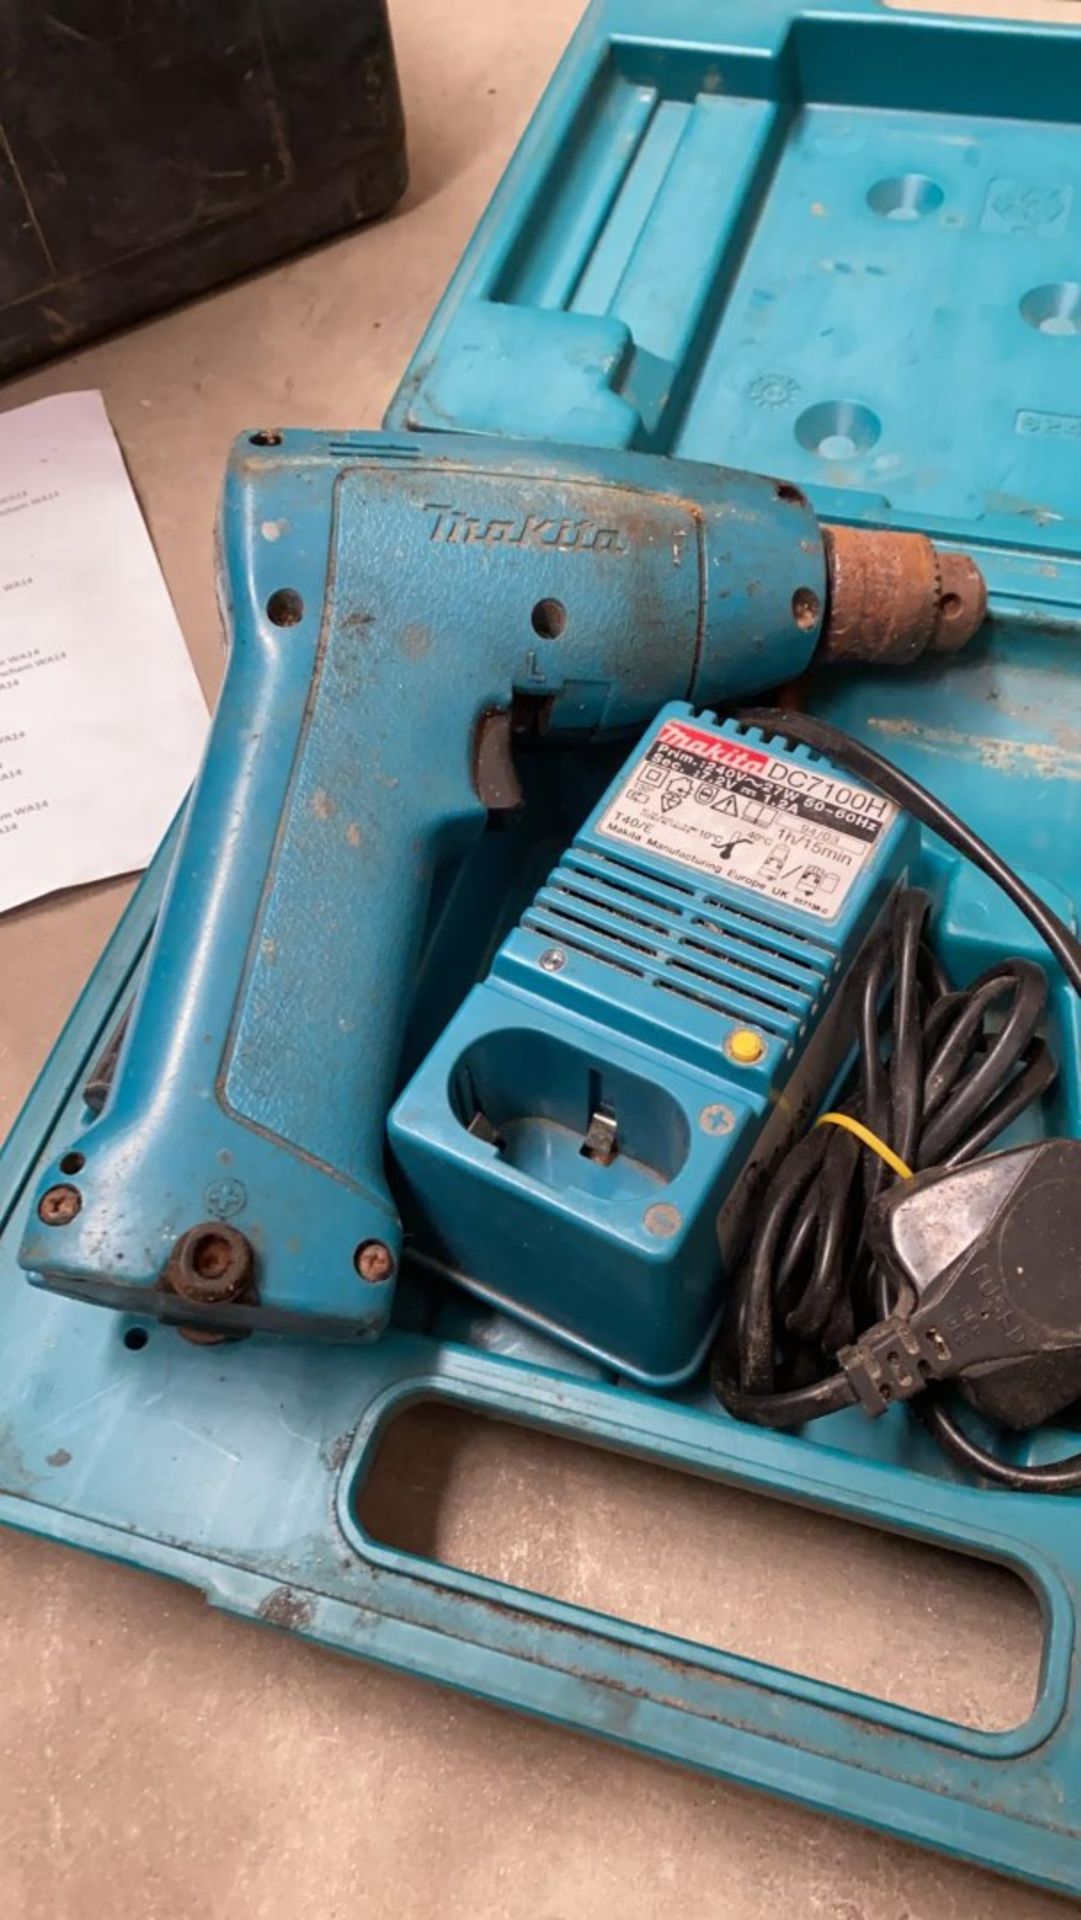 1 x Makita Cordless Drill - Used, Recently Removed From A Working Site - CL505 - Ref: TL029 - - Image 3 of 3